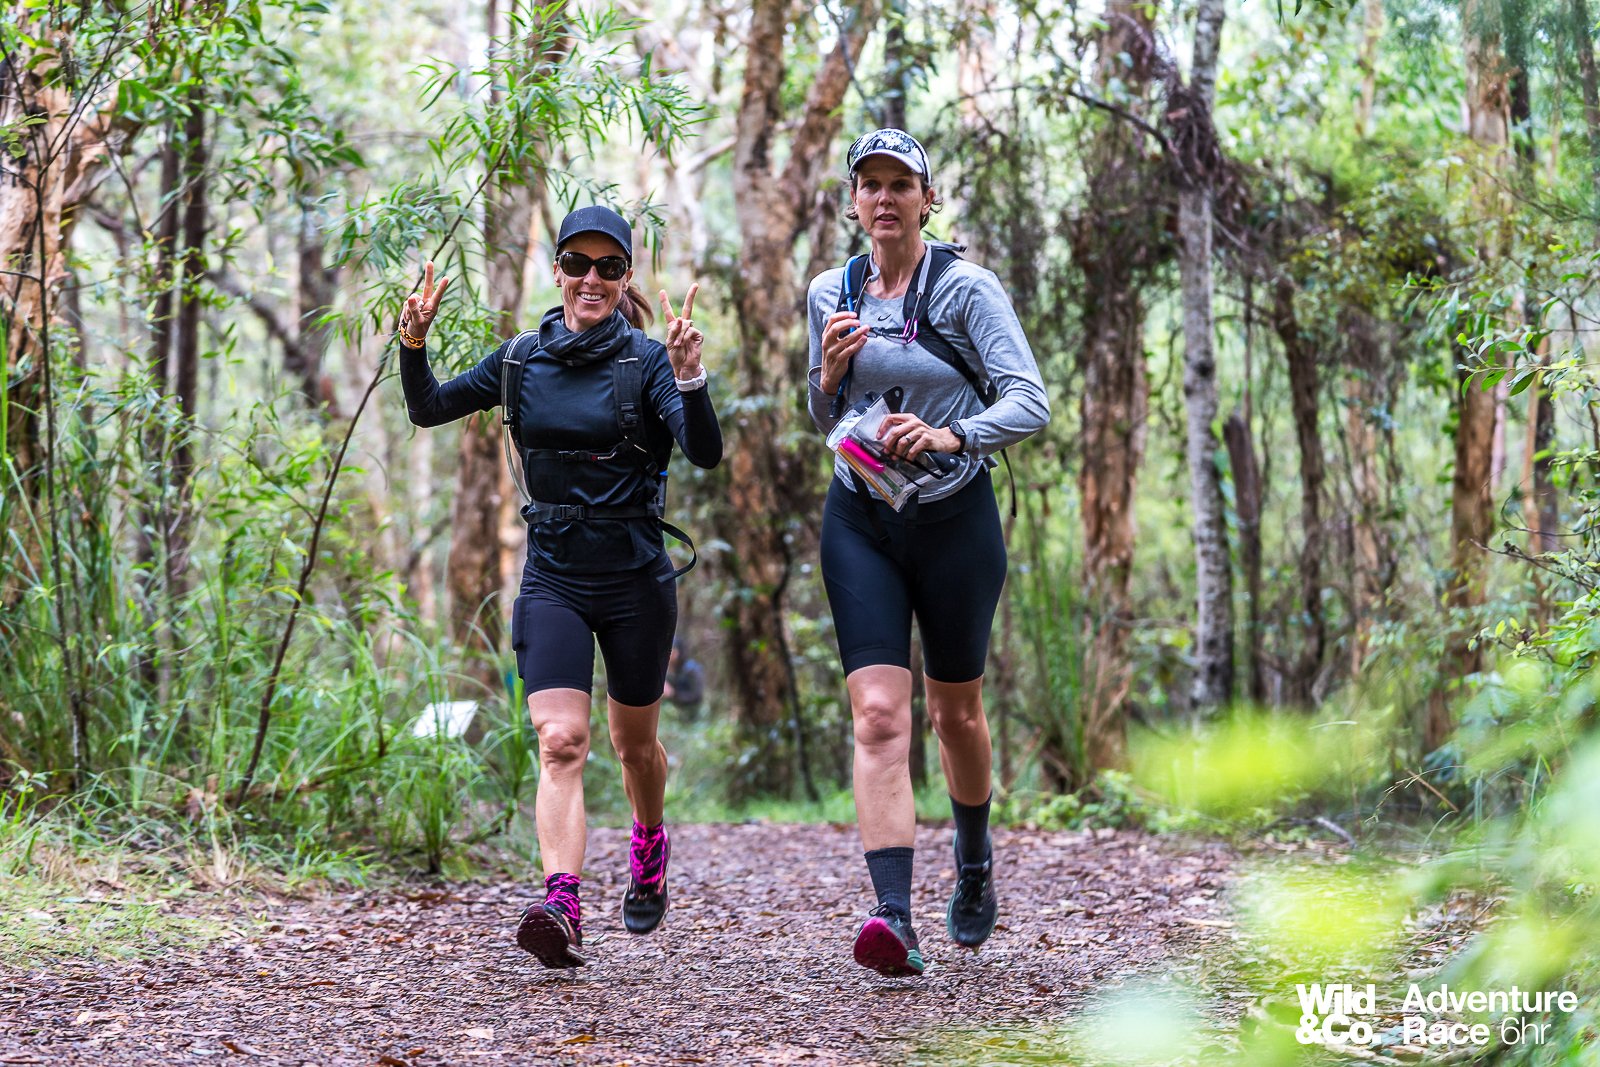 It was such a great day out in Caloundra for the Sunshine Coast 6hr over the weekend. So many smiles, the trails were lots of fun and it was a great introduction to heaps of people to Adventure Racing!

The Gold Coast 6hr is up next with a location a